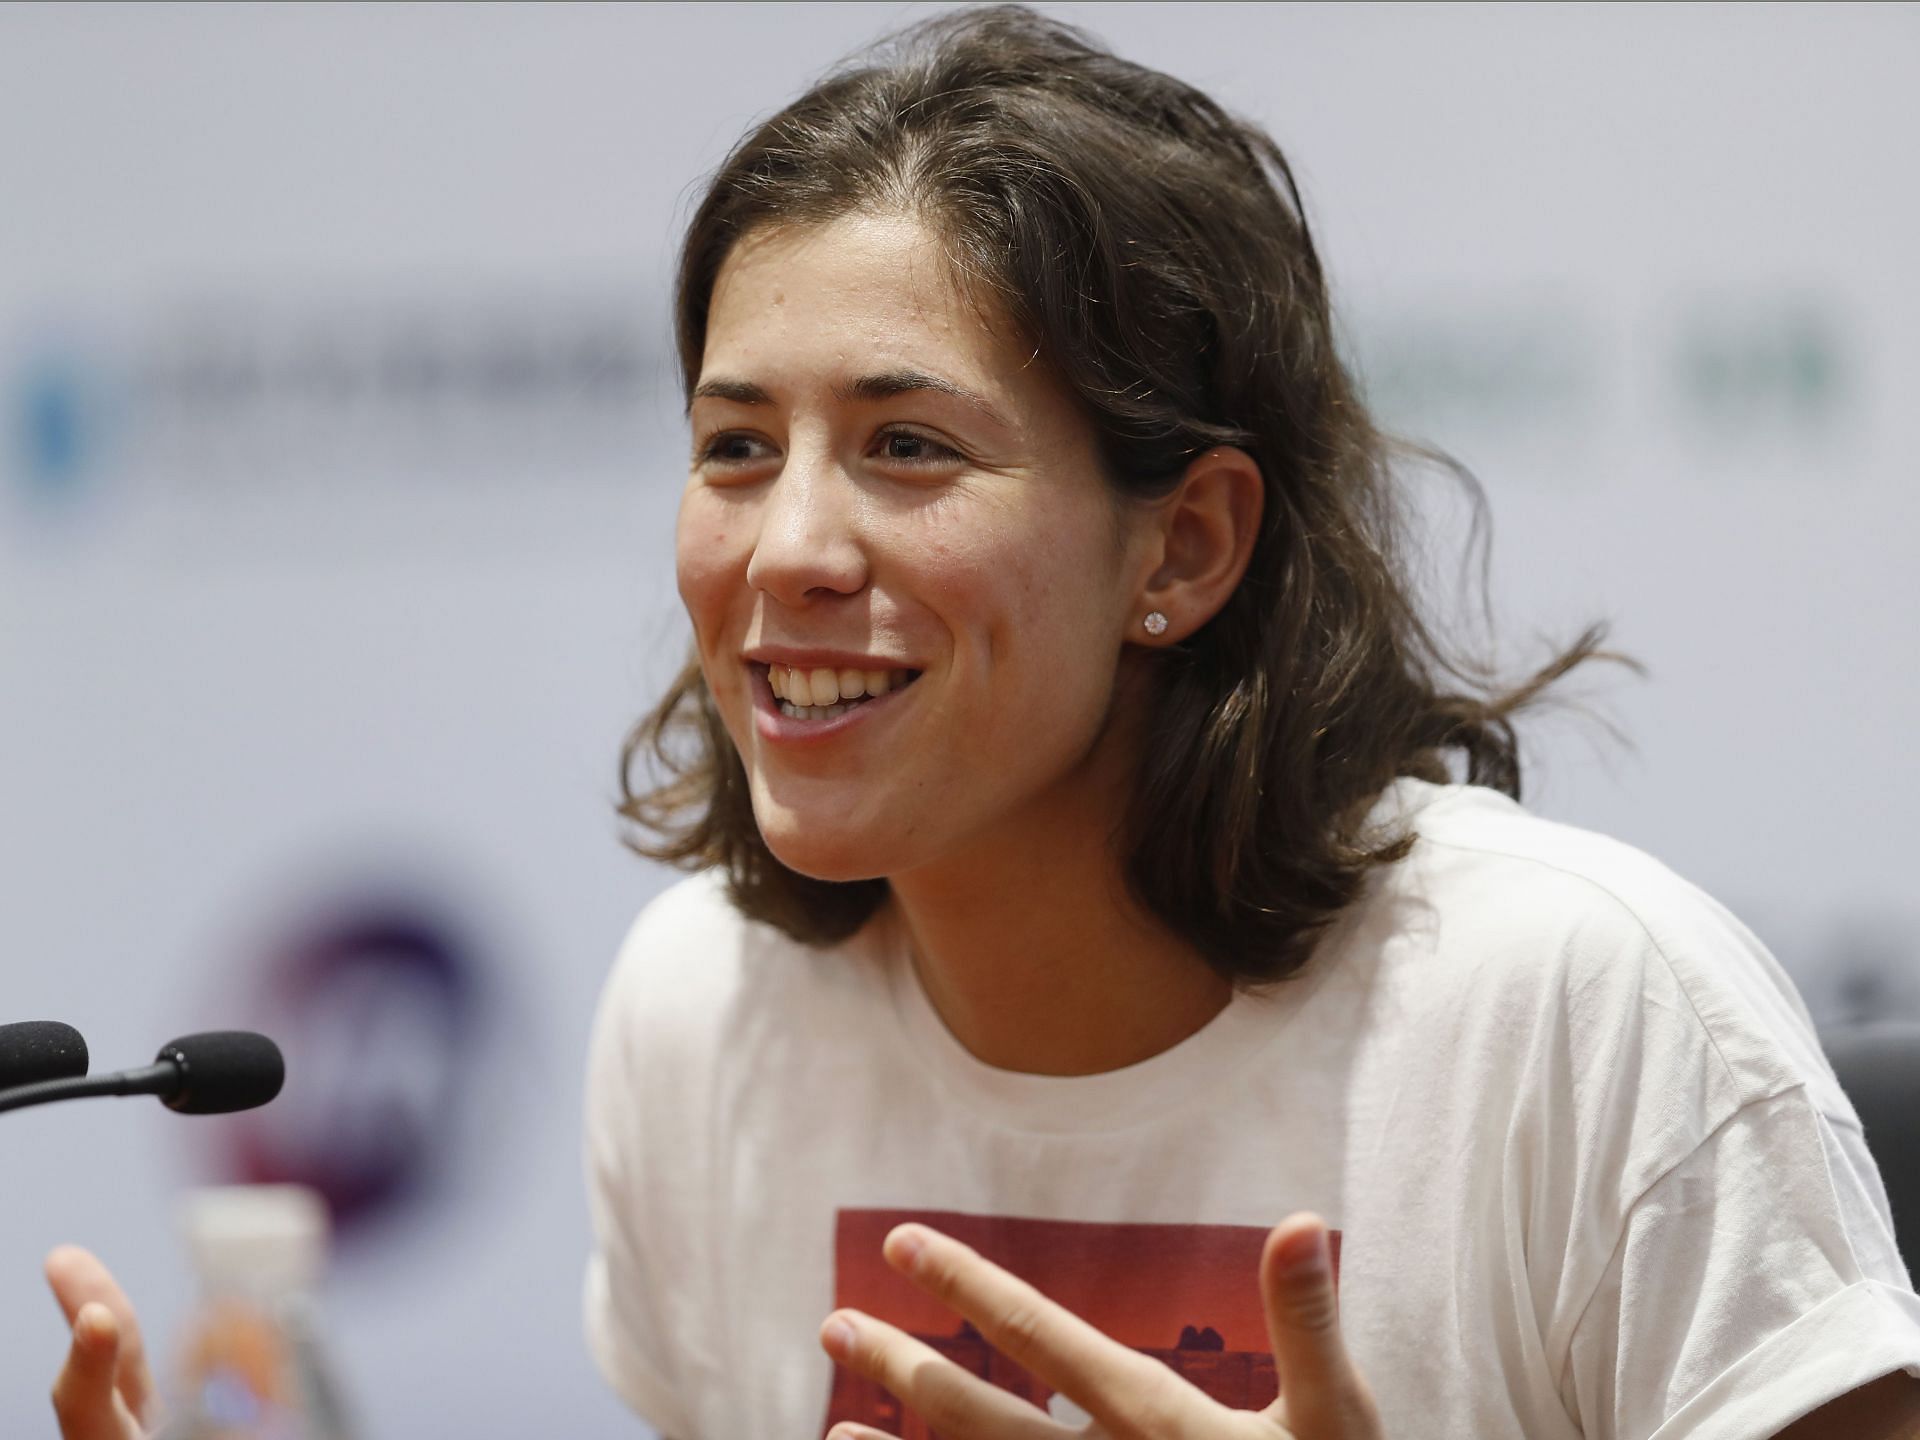 In Pictures: Garbine Muguruza shares glimpses of her tennis practice session amidst year-long absence from WTA Tour